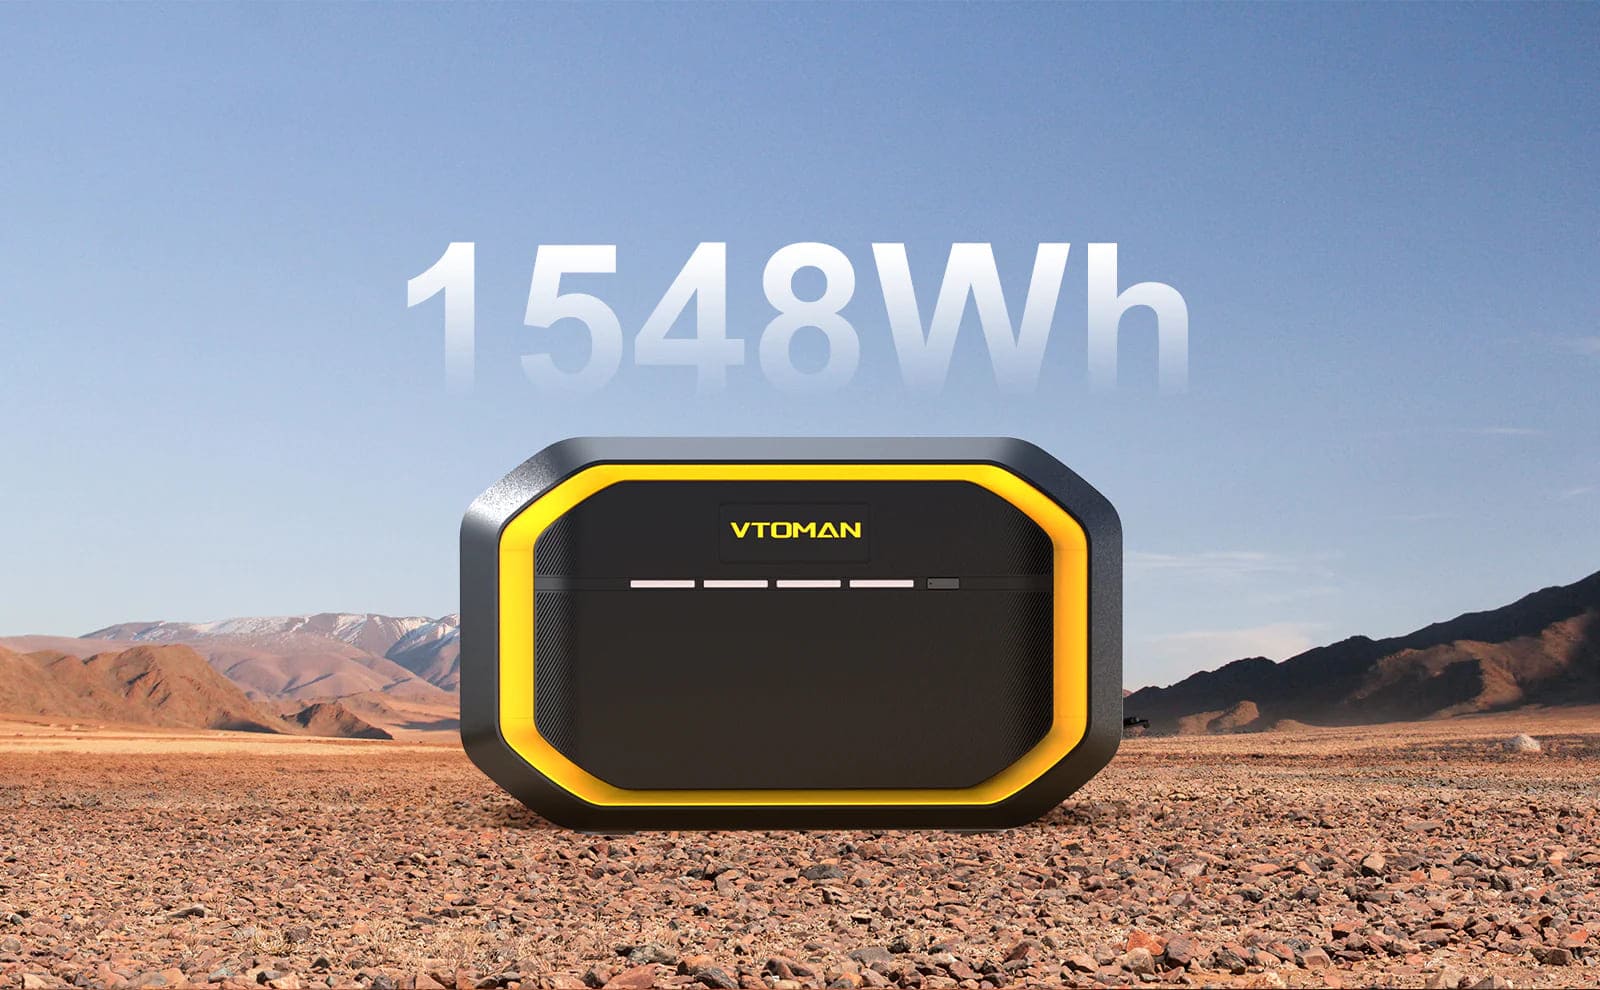 VTOMAN extra battery for off-grid use